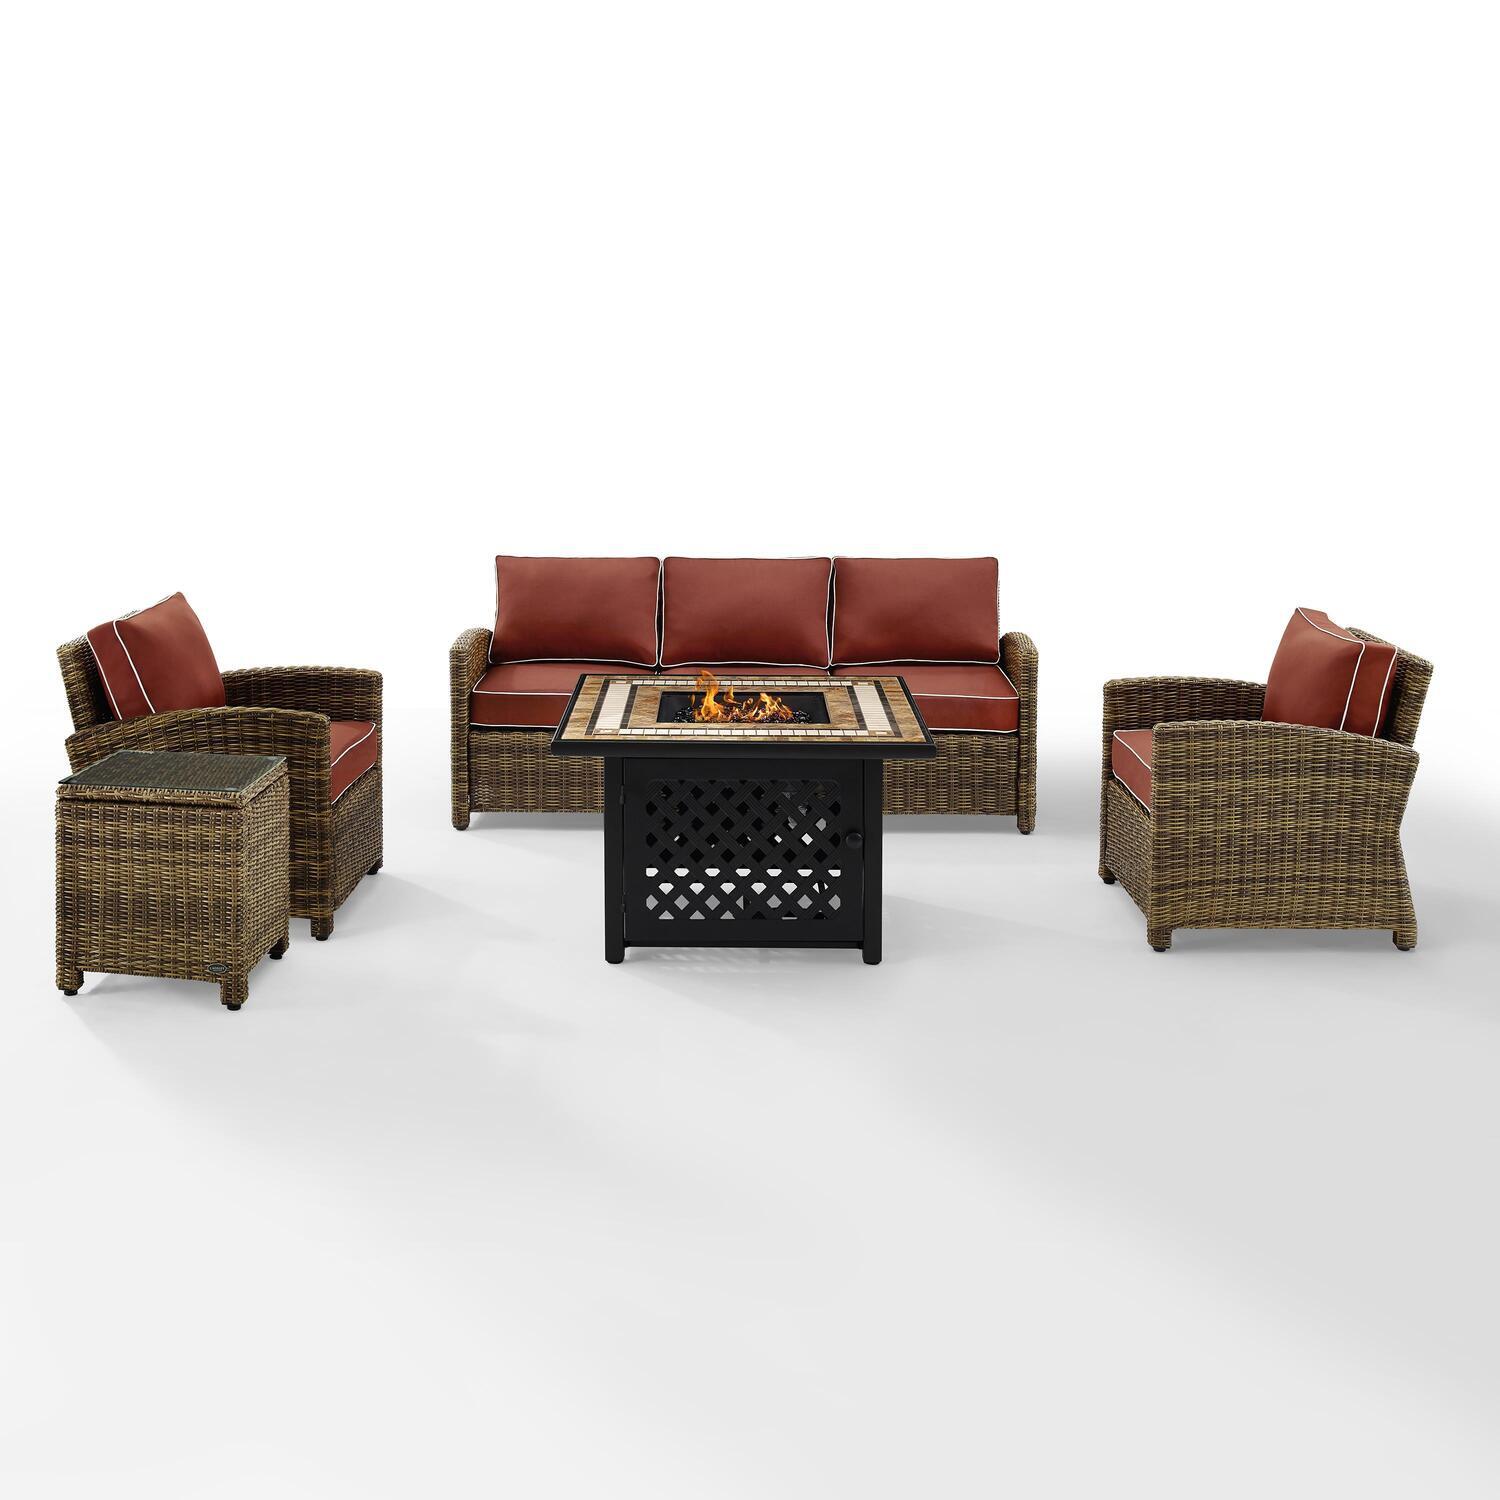 Crosley Furniture Bradenton 5 Piece Patio Fabric Fire Pit Sofa Set in Brown/Red - image 1 of 9